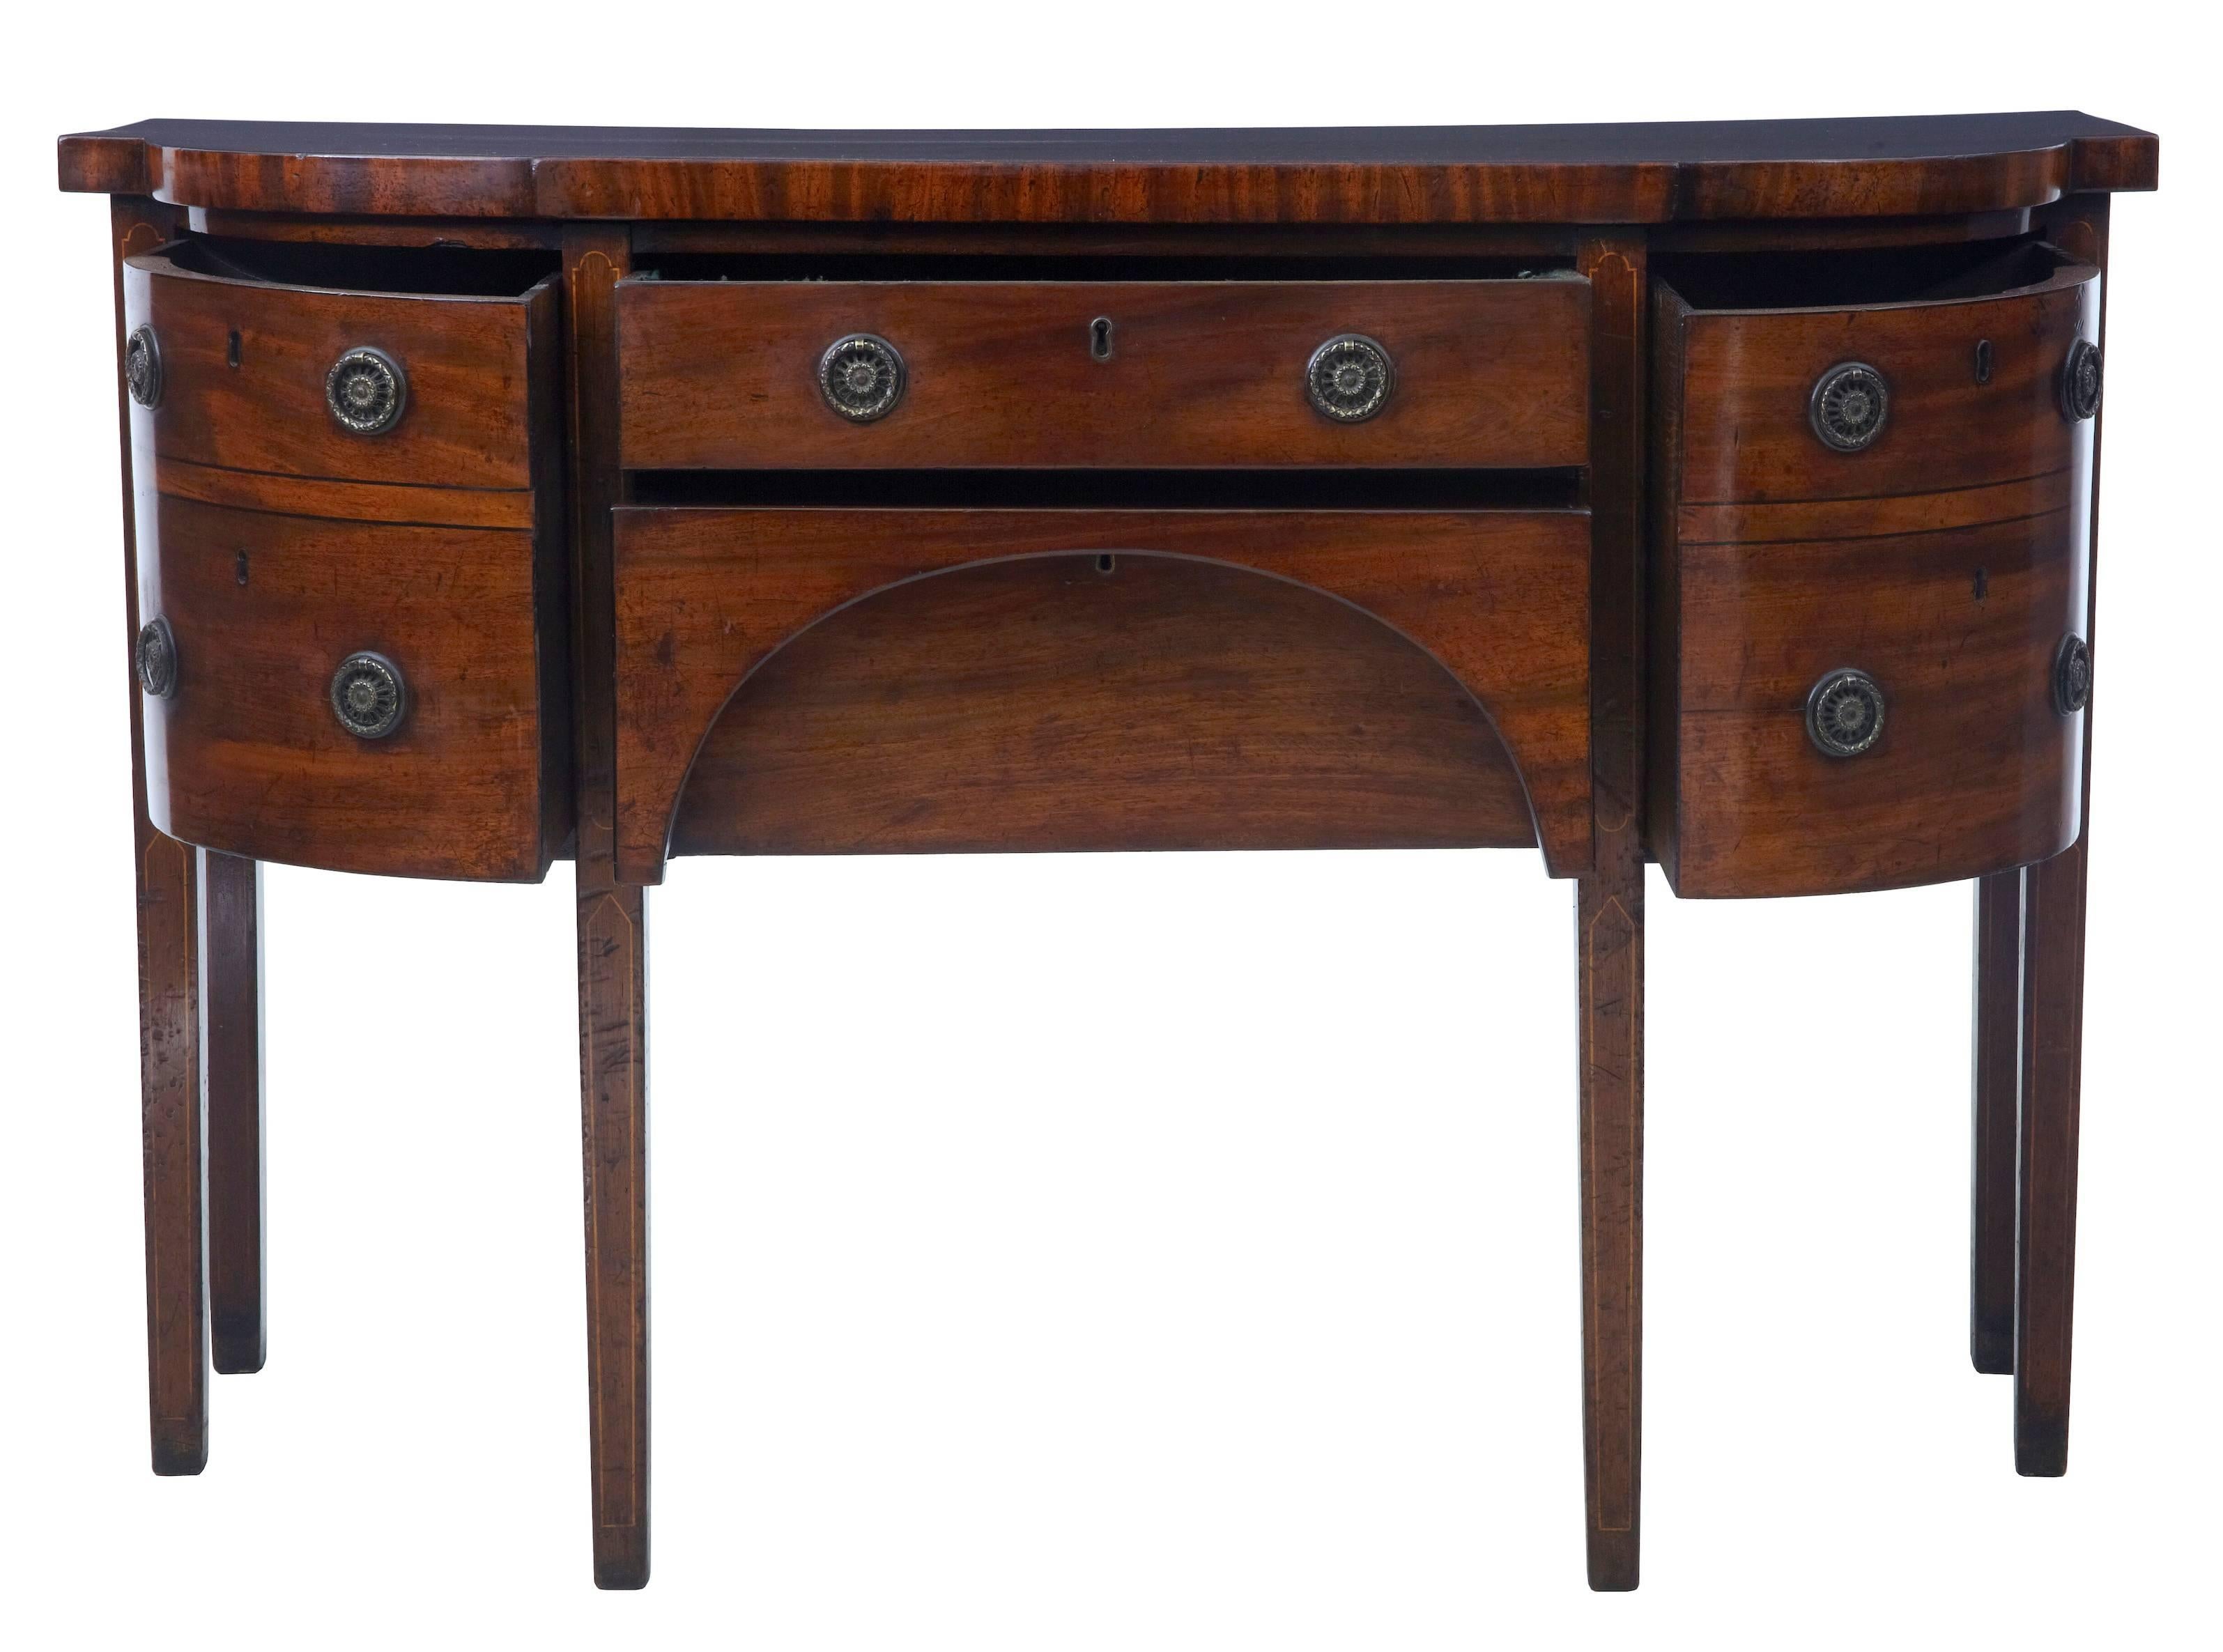 Fine quality late Georgian mahogany sideboard, circa 1810.
Bowfront and breakfront in shape.
Two drawers to the front and two shaped drawers either side.
Strung with ebony.
Standing on straight legs.
Measures:
Height: 35